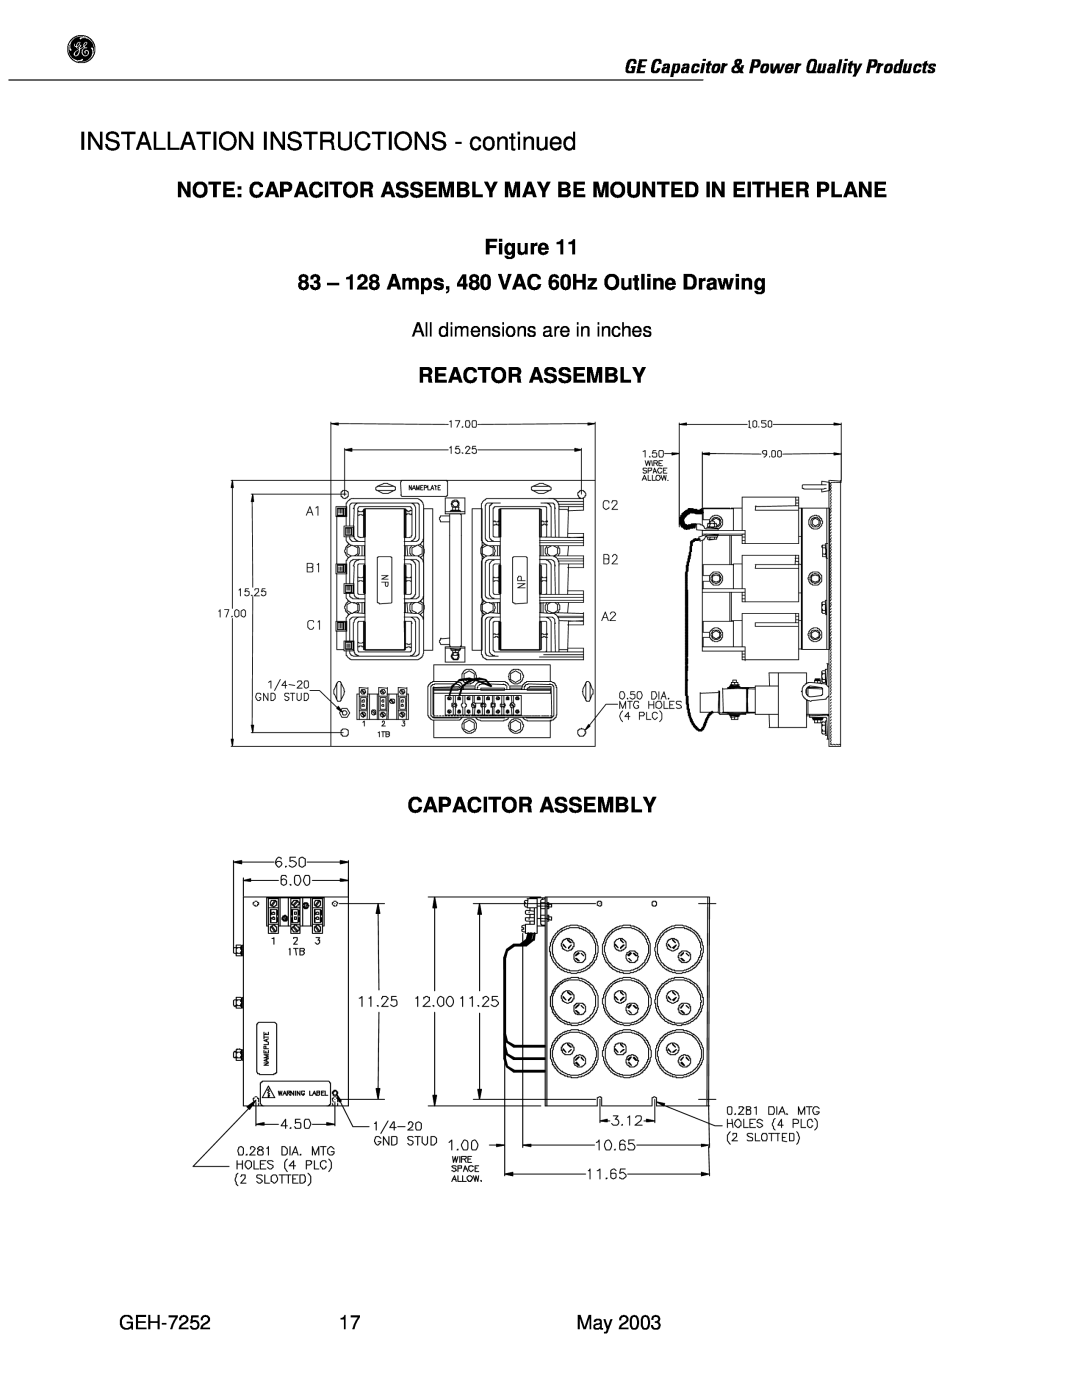 GE SERIES B 480 user manual 83 - 128 Amps, 480 VAC 60Hz Outline Drawing, INSTALLATION INSTRUCTIONS - continued 